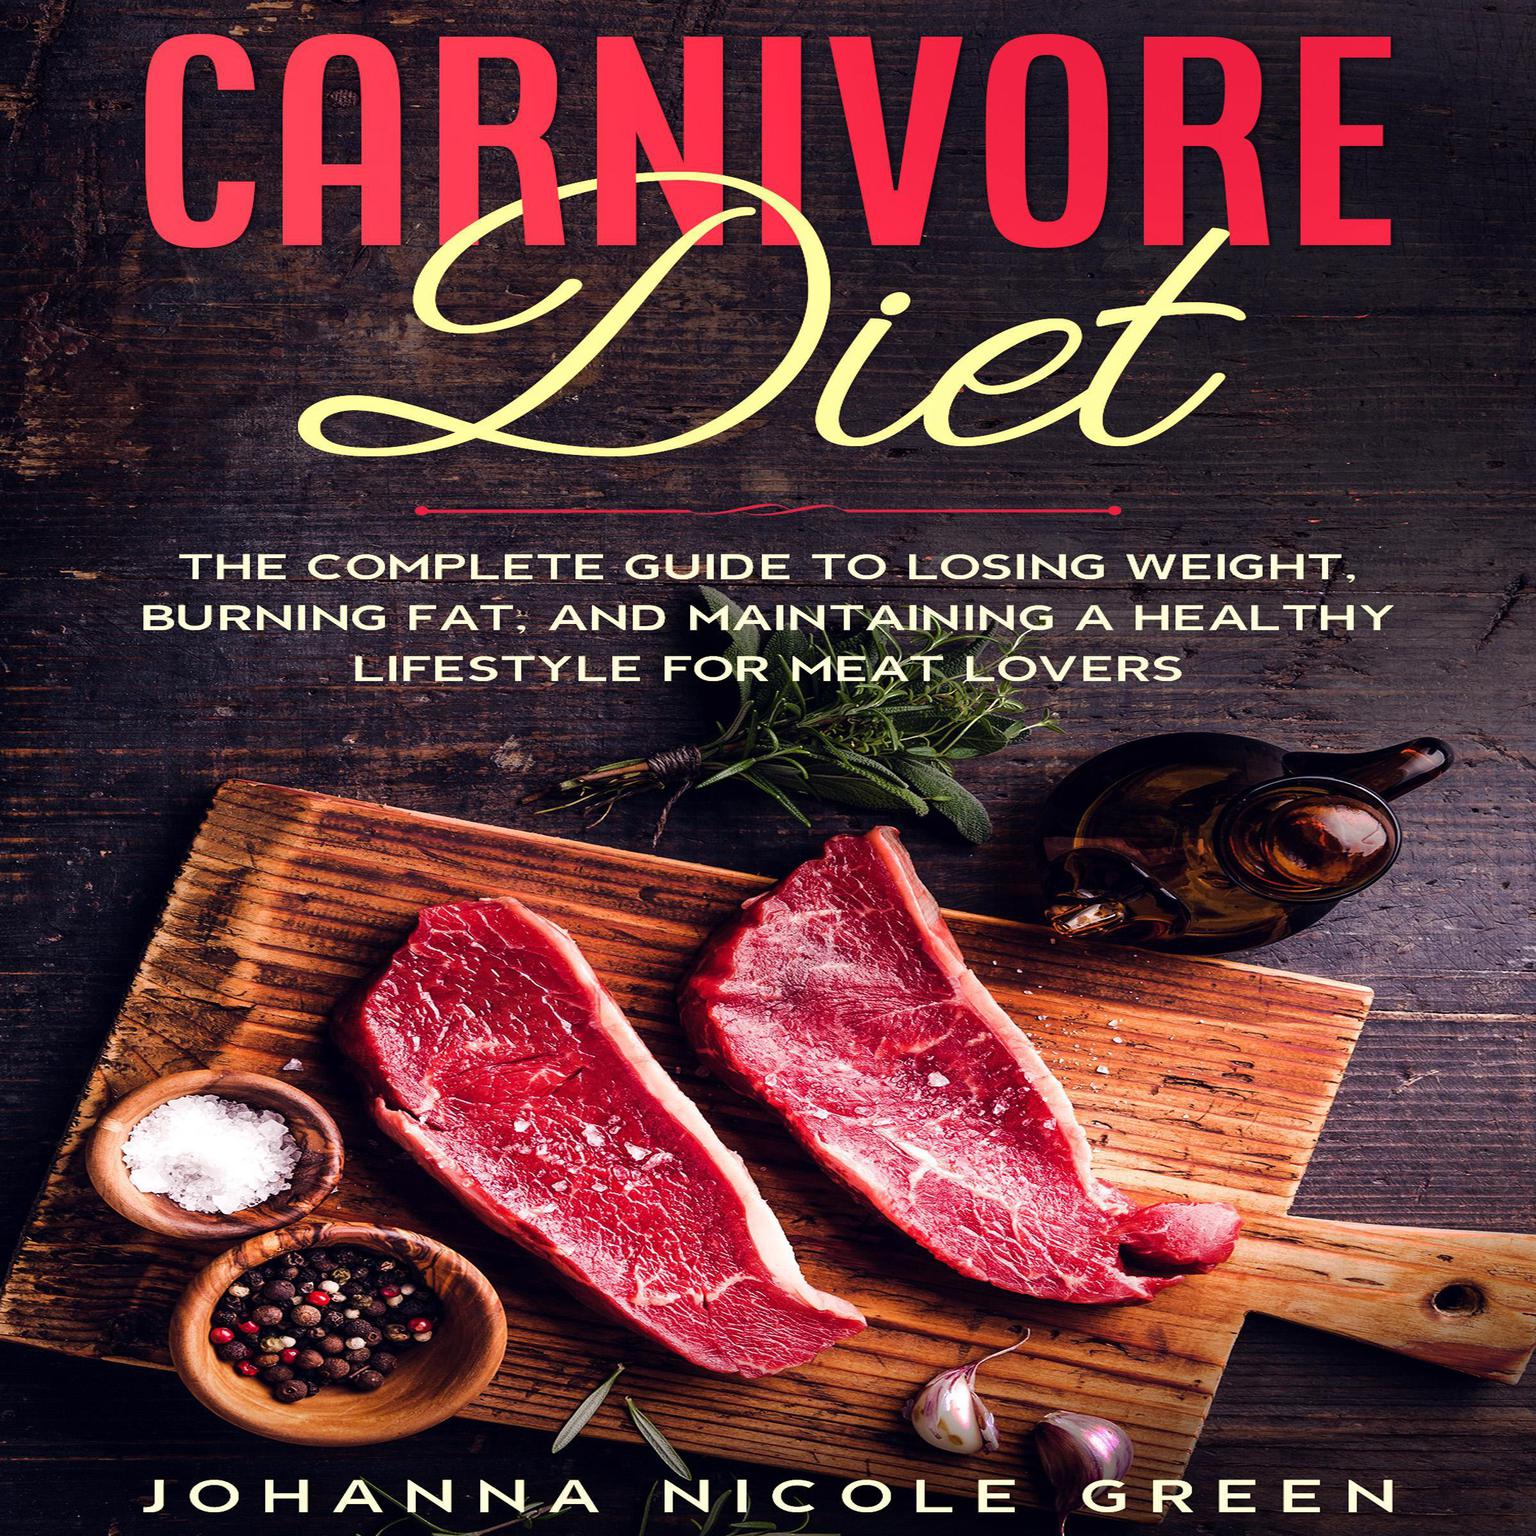 Carnivore Diet: The Complete Guide to Losing Weight, Burning Fat, and Maintaining a Healthy Lifestyle for Meat Lovers Audiobook, by Johanna Nicole Green